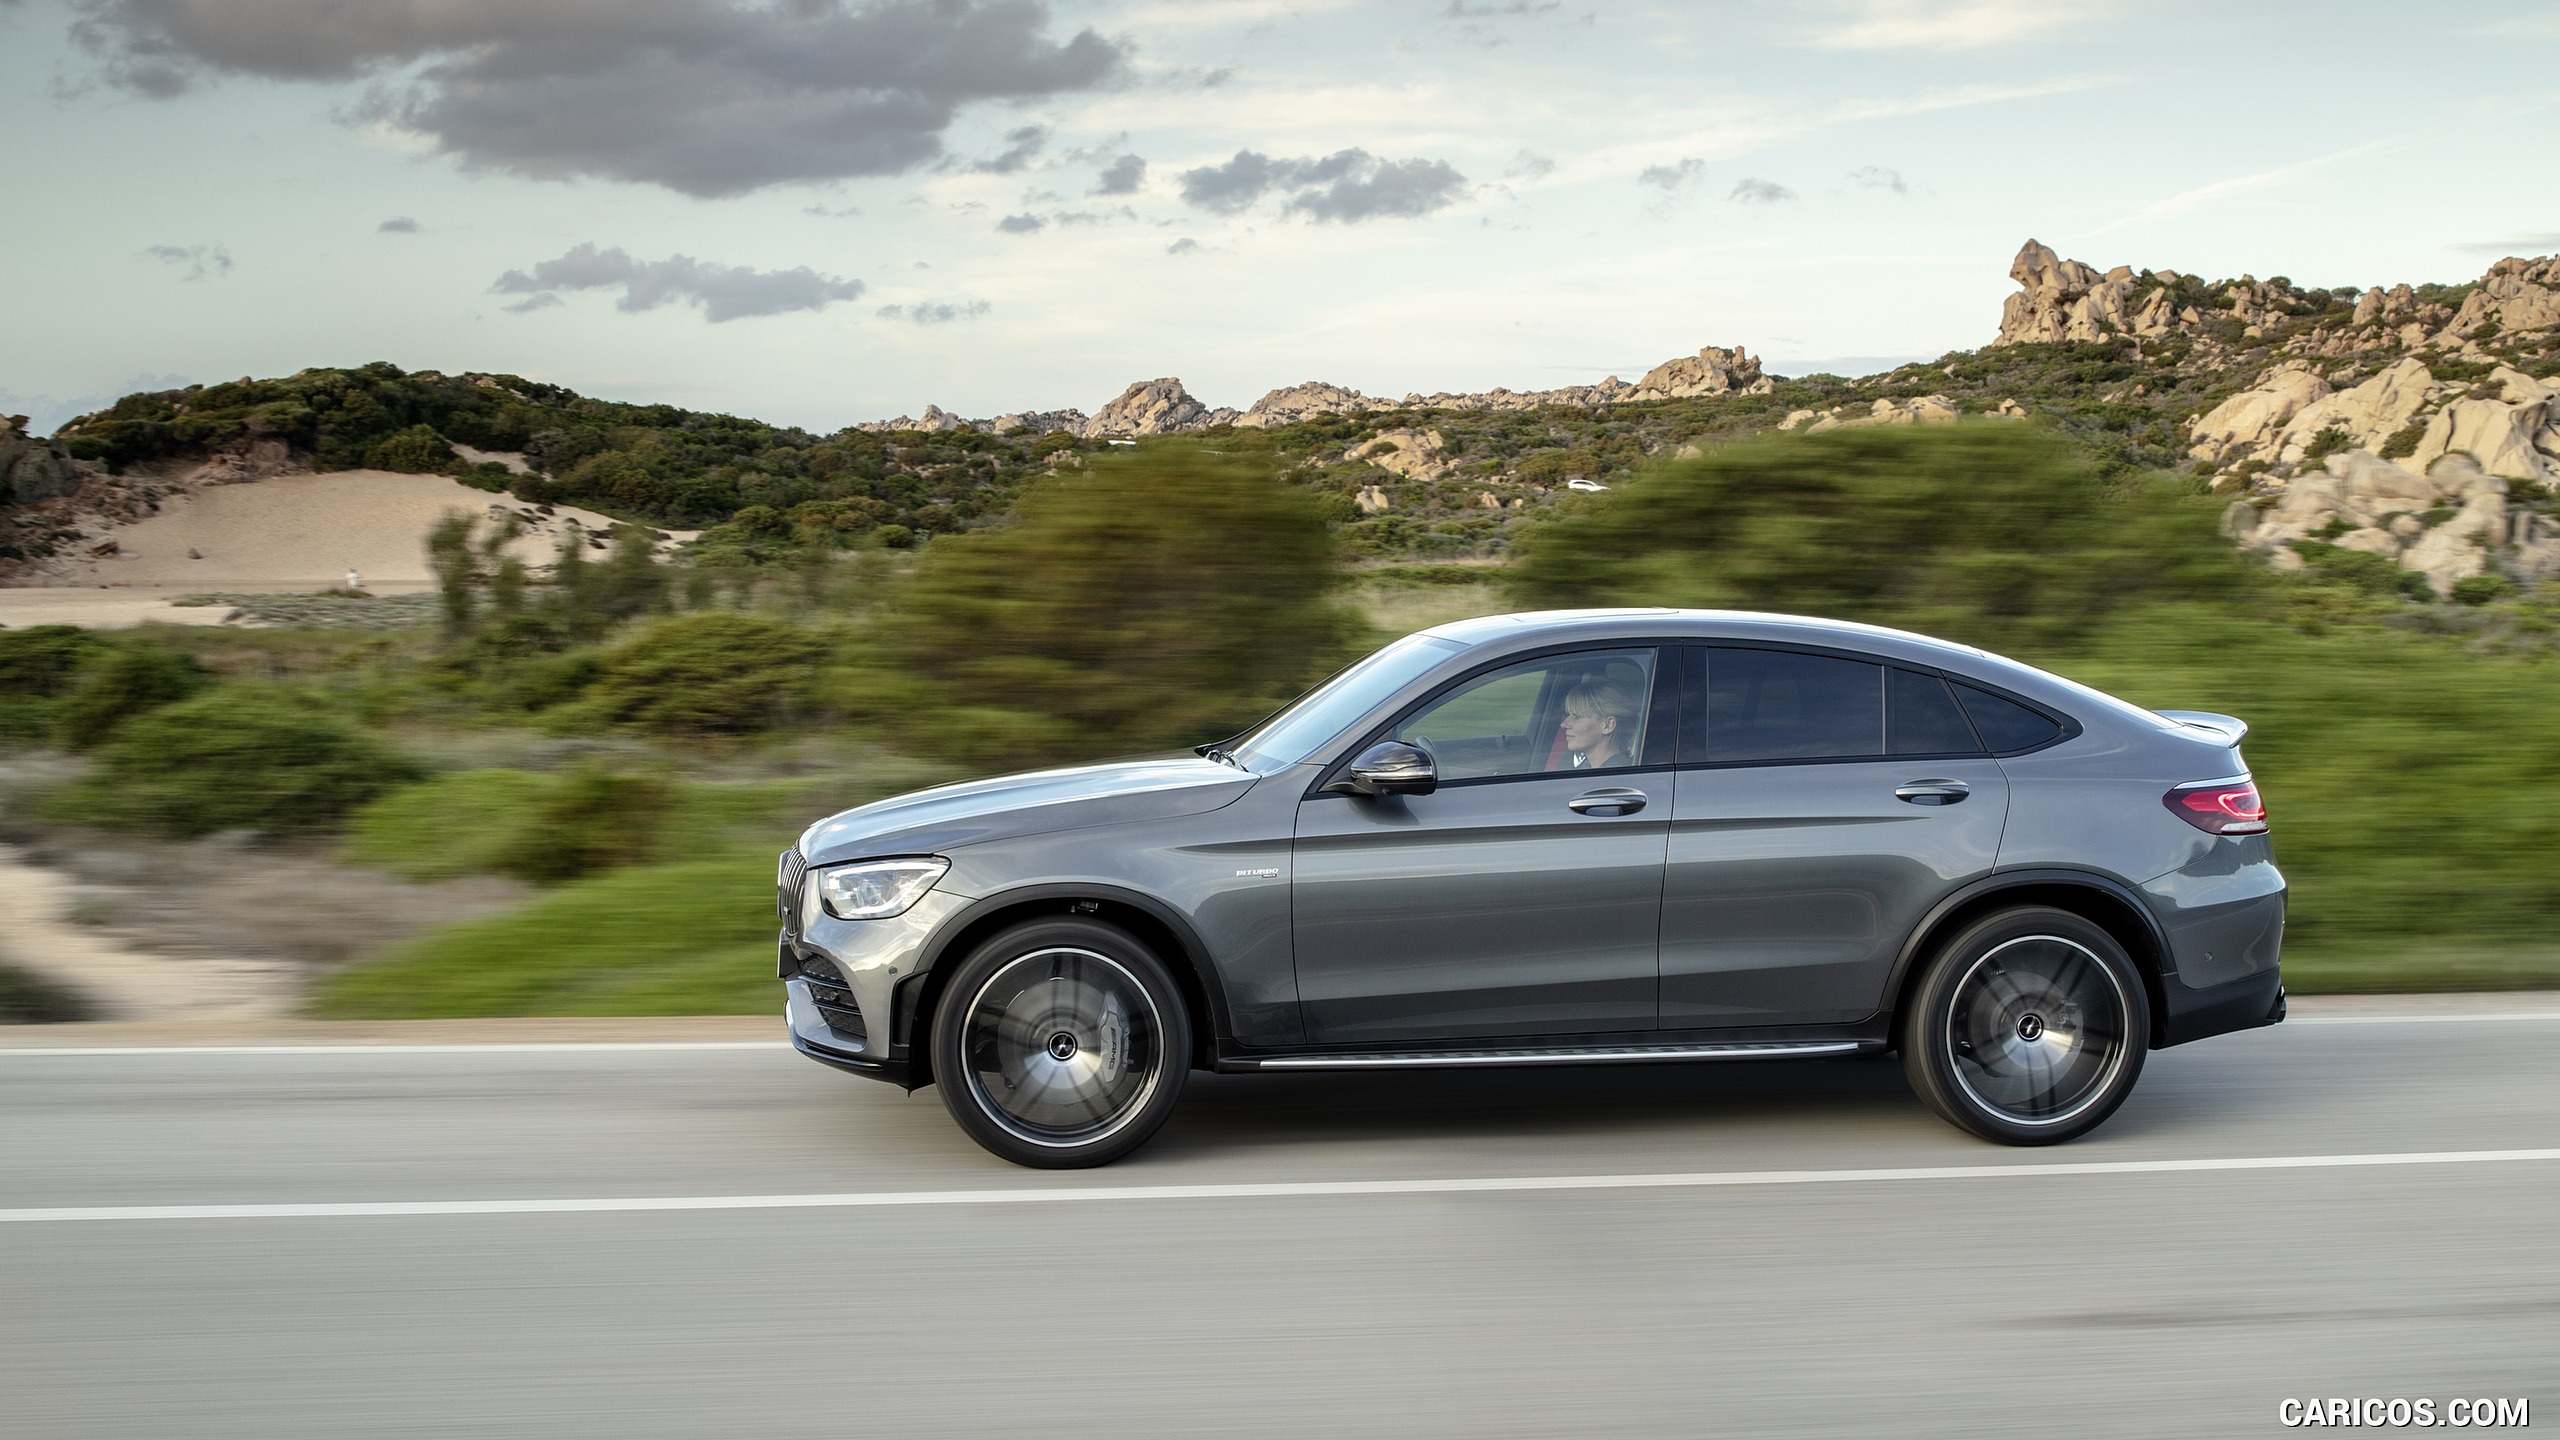 2020 Mercedes-AMG GLC 43 4MATIC Coupe - Side, #8 of 173